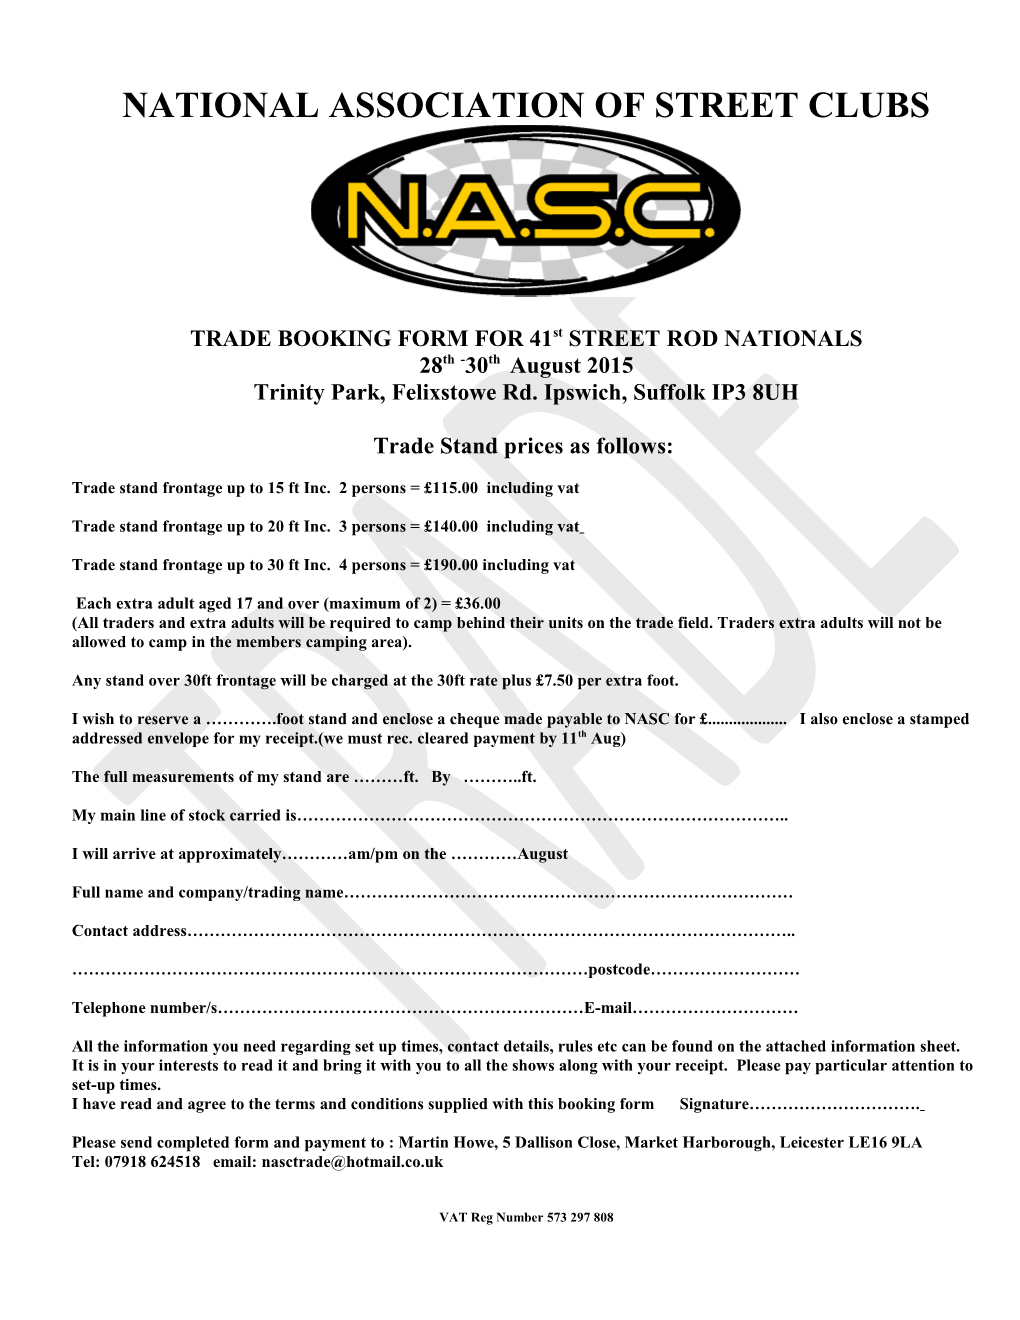 TRADE BOOKING FORM for 36Th STREET ROD NATIONALS